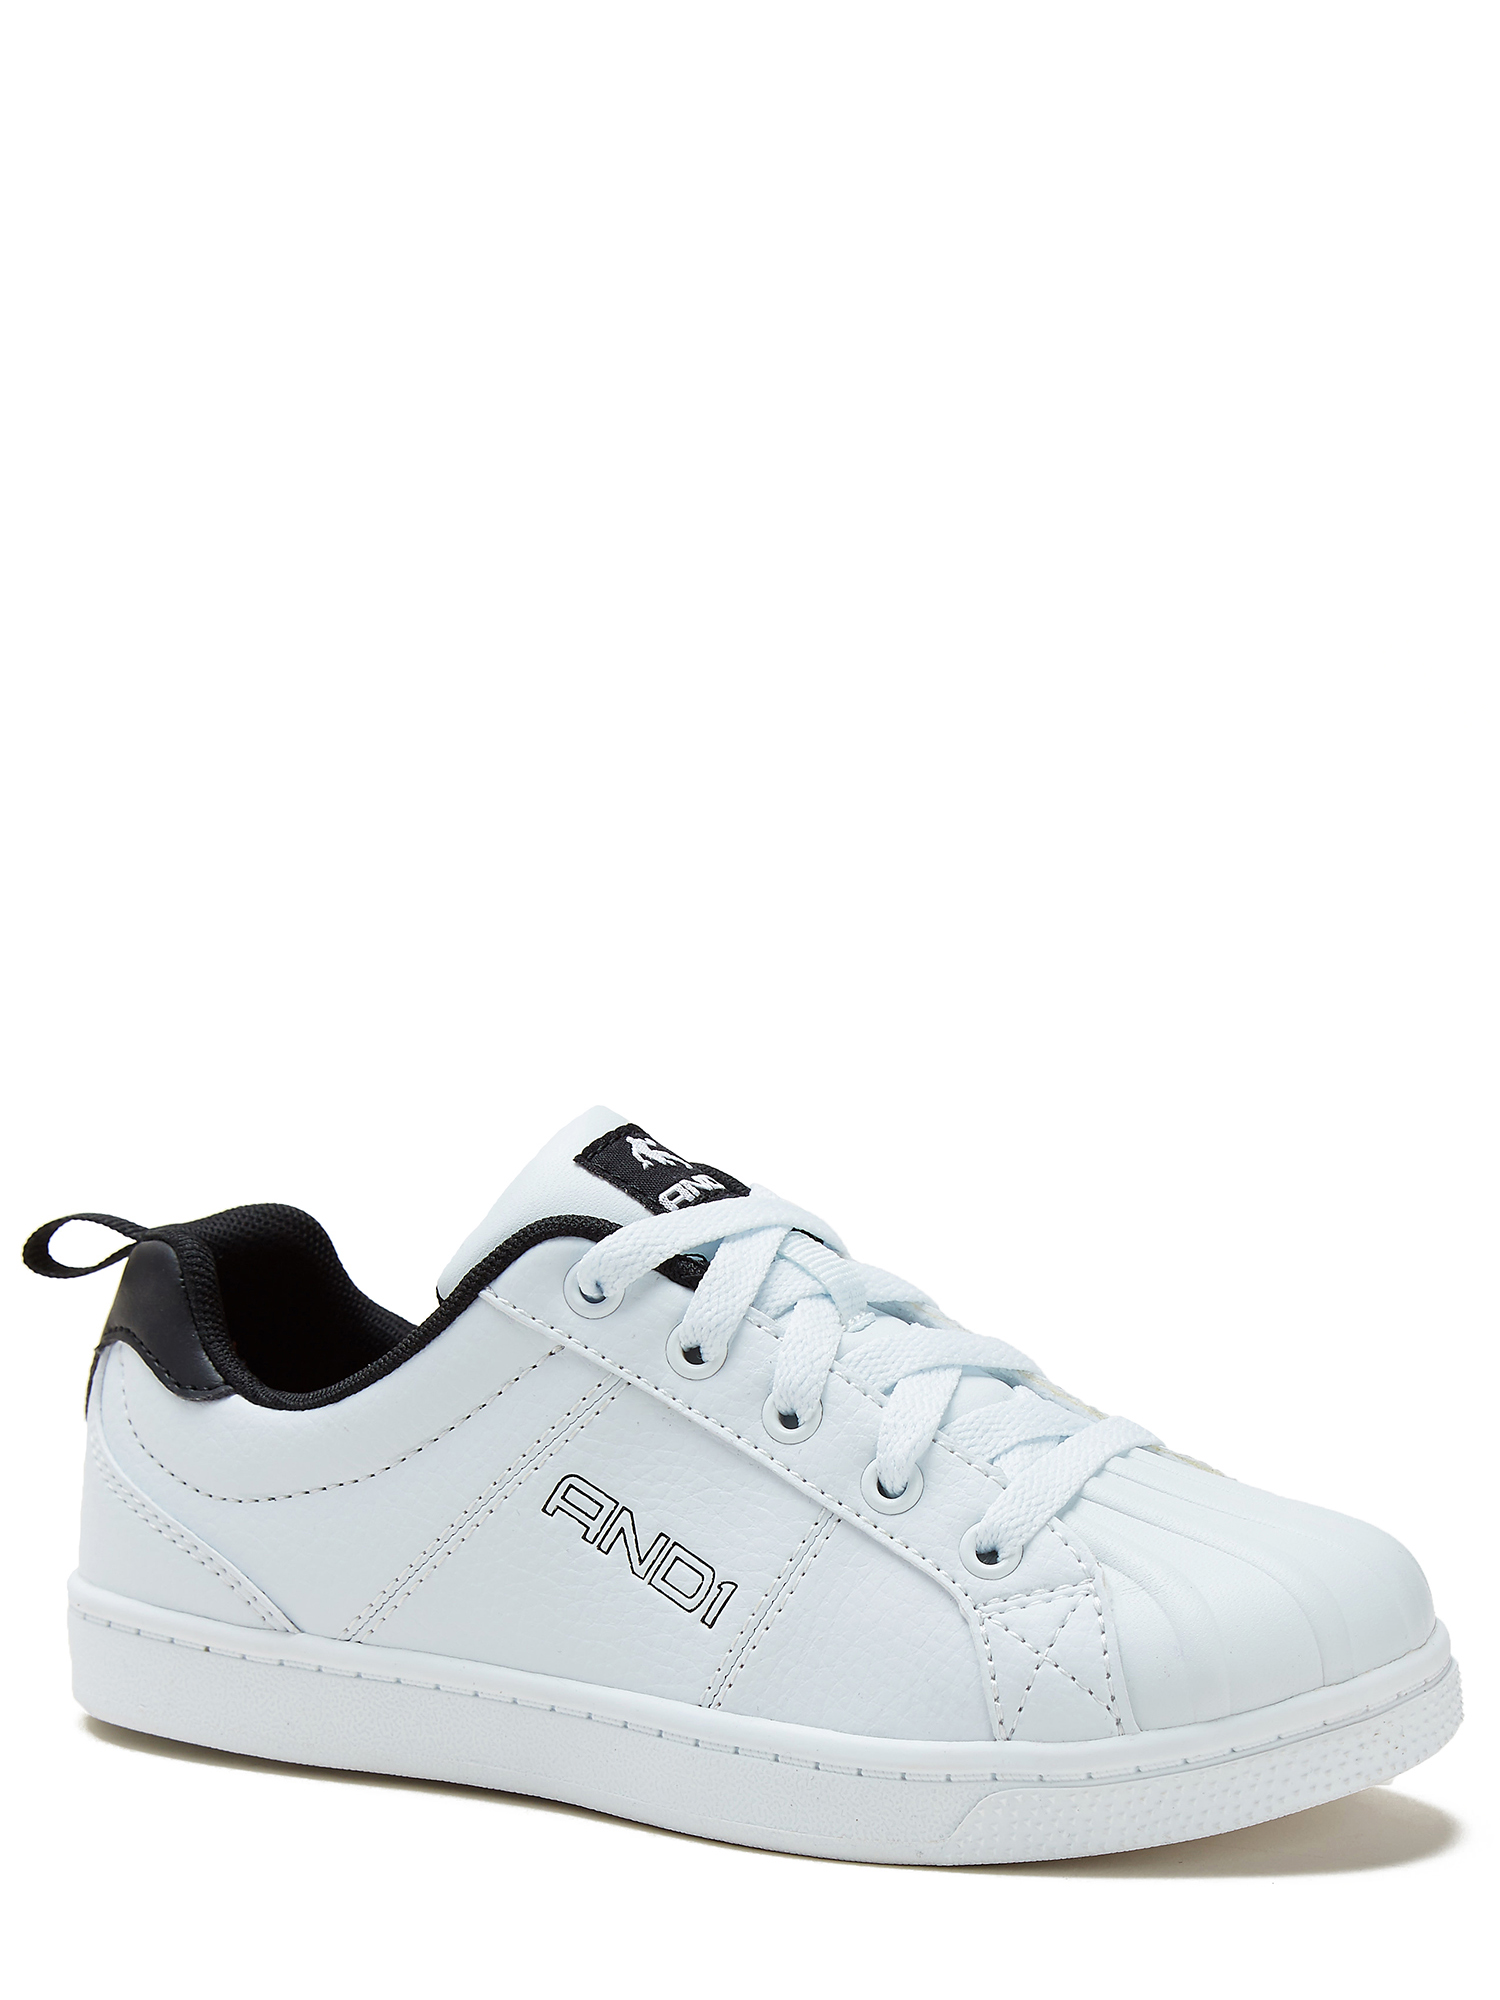 Boys' Meister Casual Court Shoe - image 1 of 5